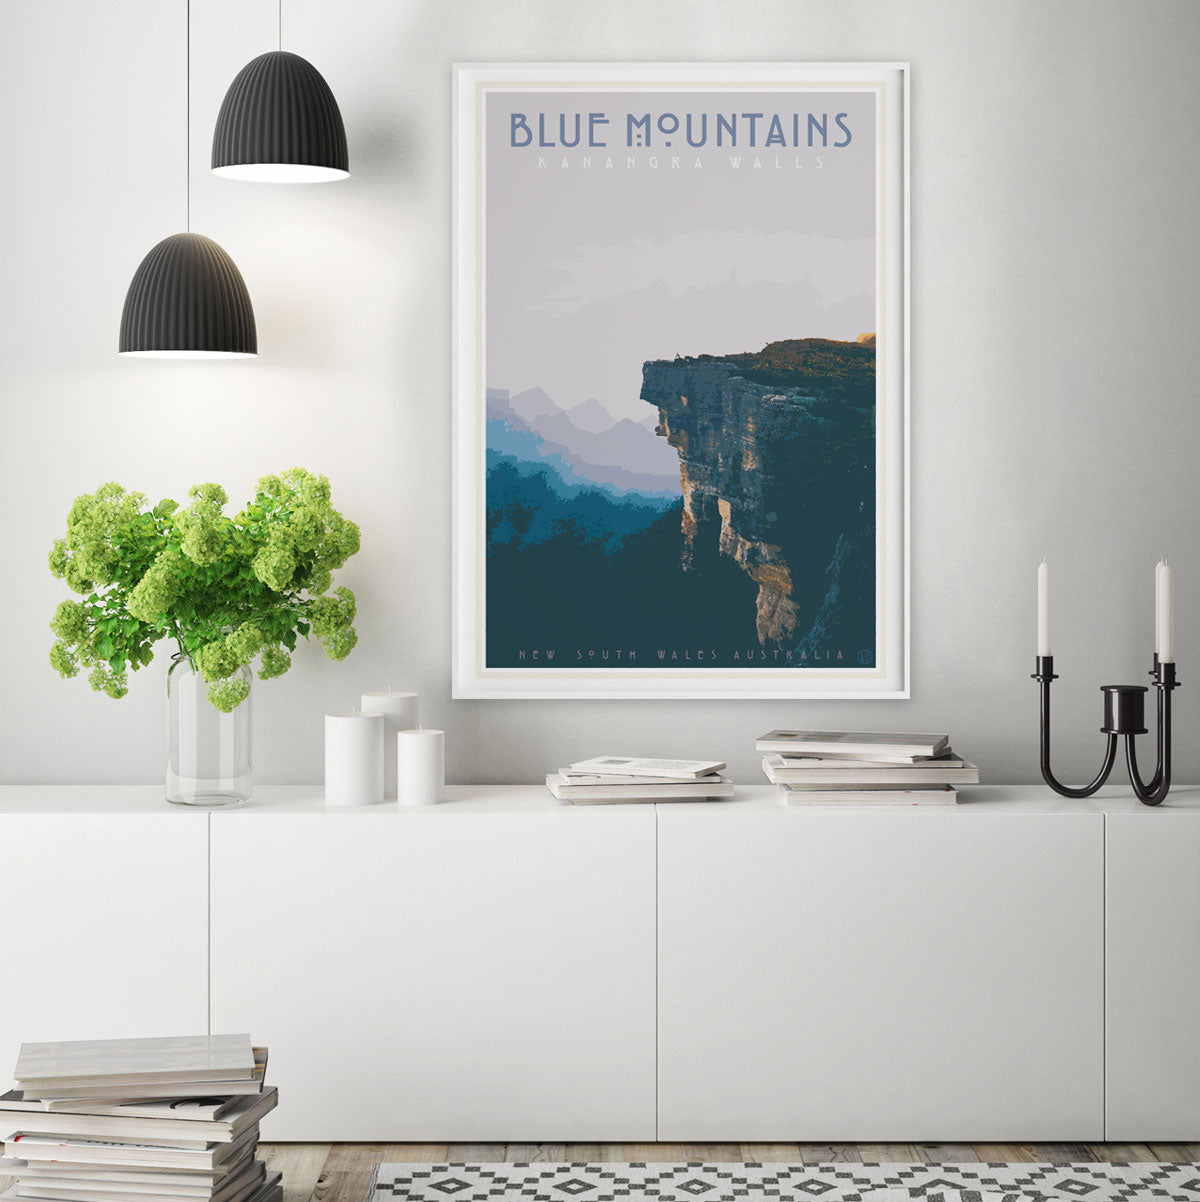 Blue Mountains vintage travel style art print by Places We Luv